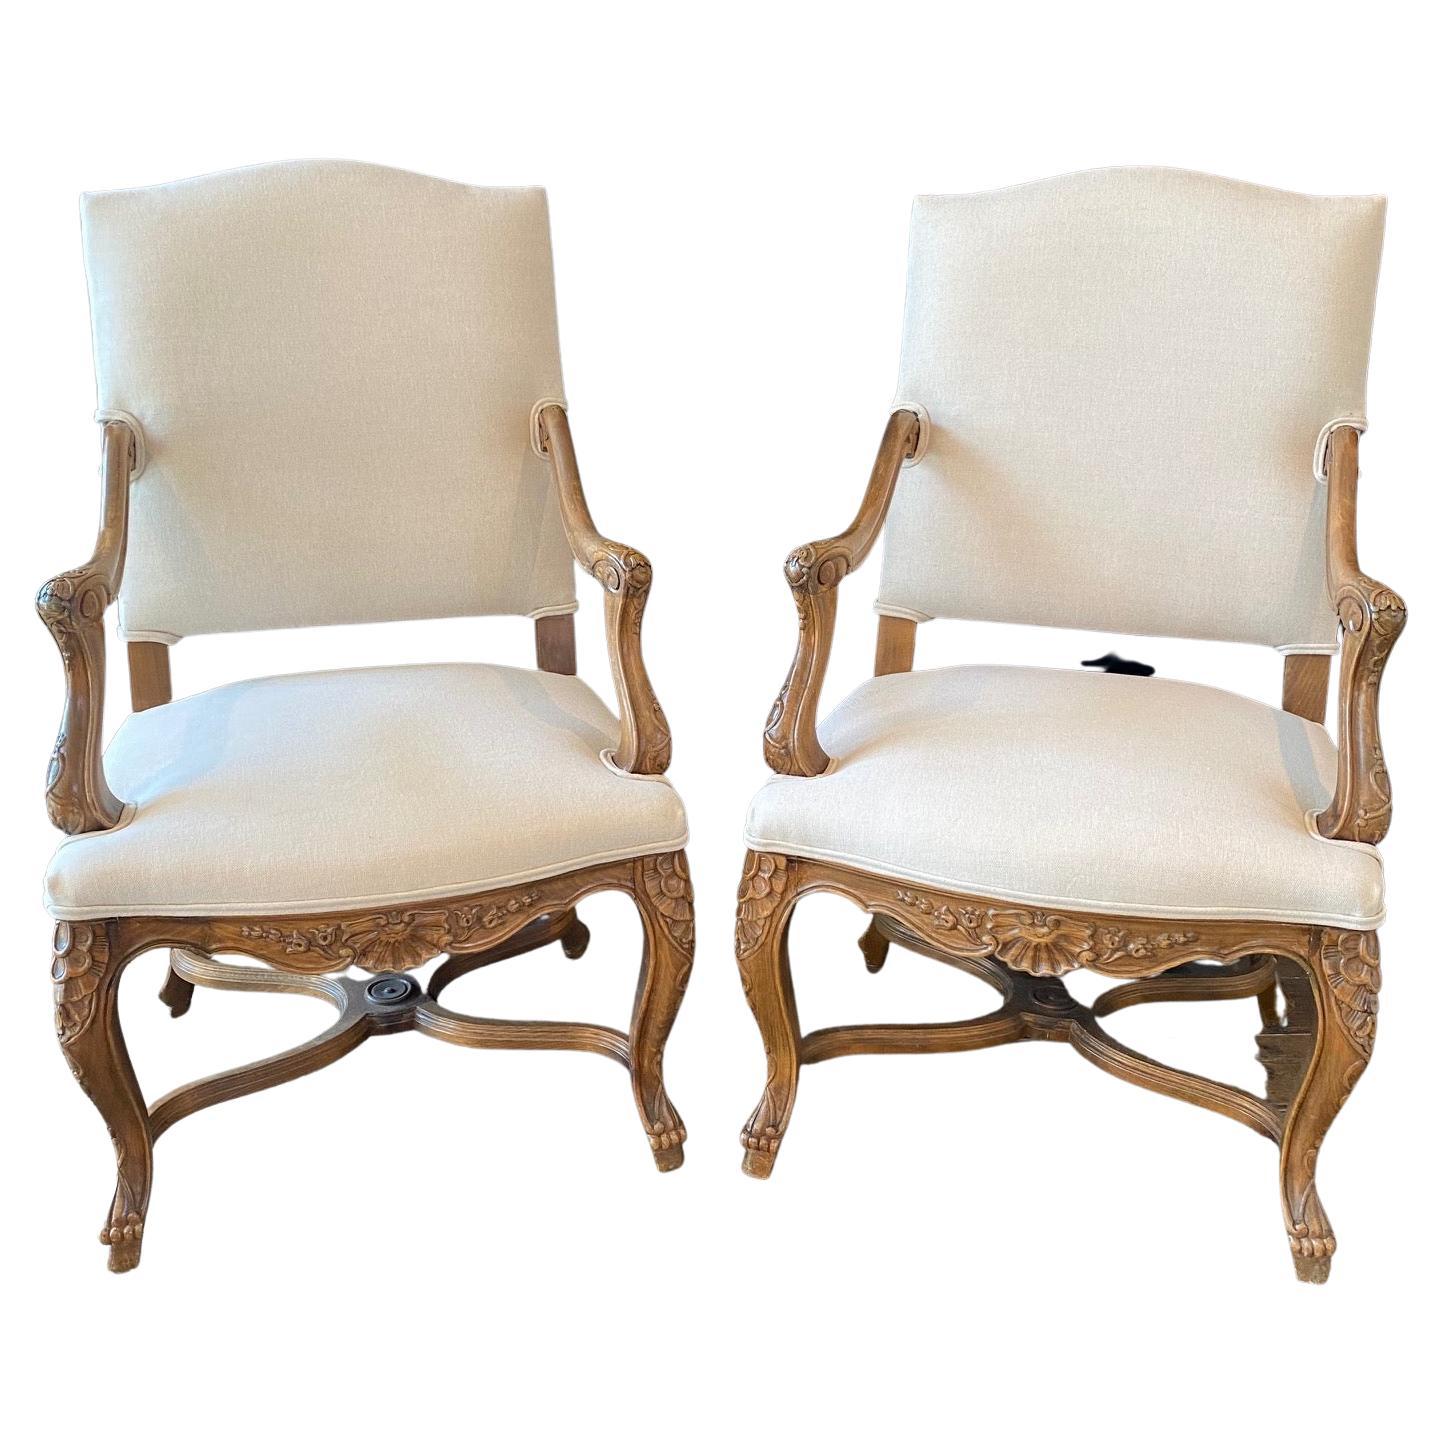 Pair of Antique French Louis XV Fauteuils or Armchairs 